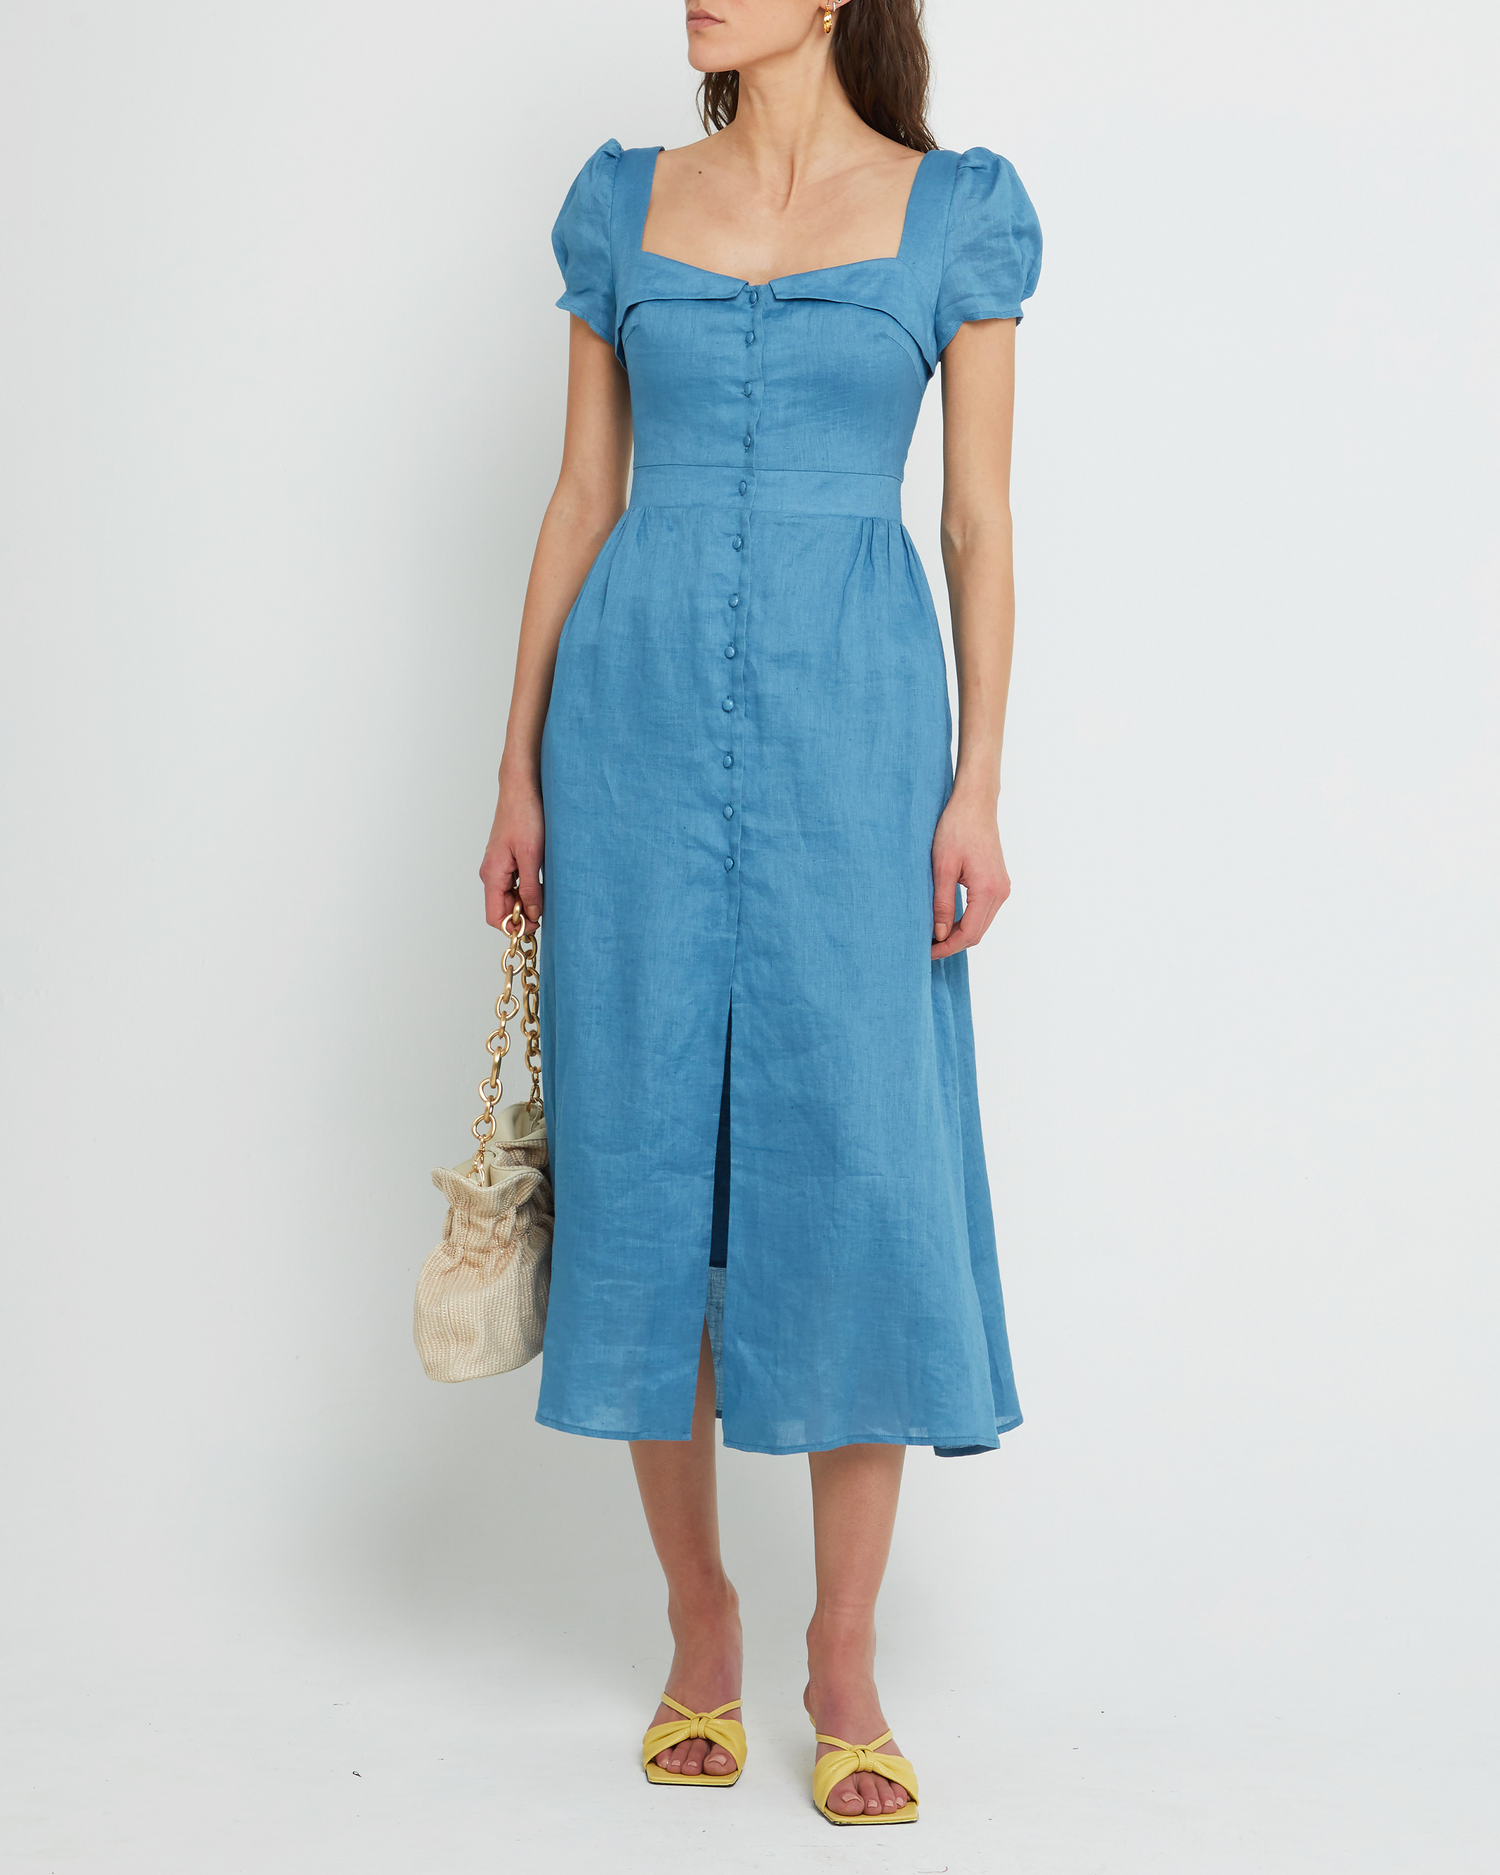 Fifth image of Ryder Dress, a blue maxi dress, button up, bodice detail, short sleeves, cap sleeves